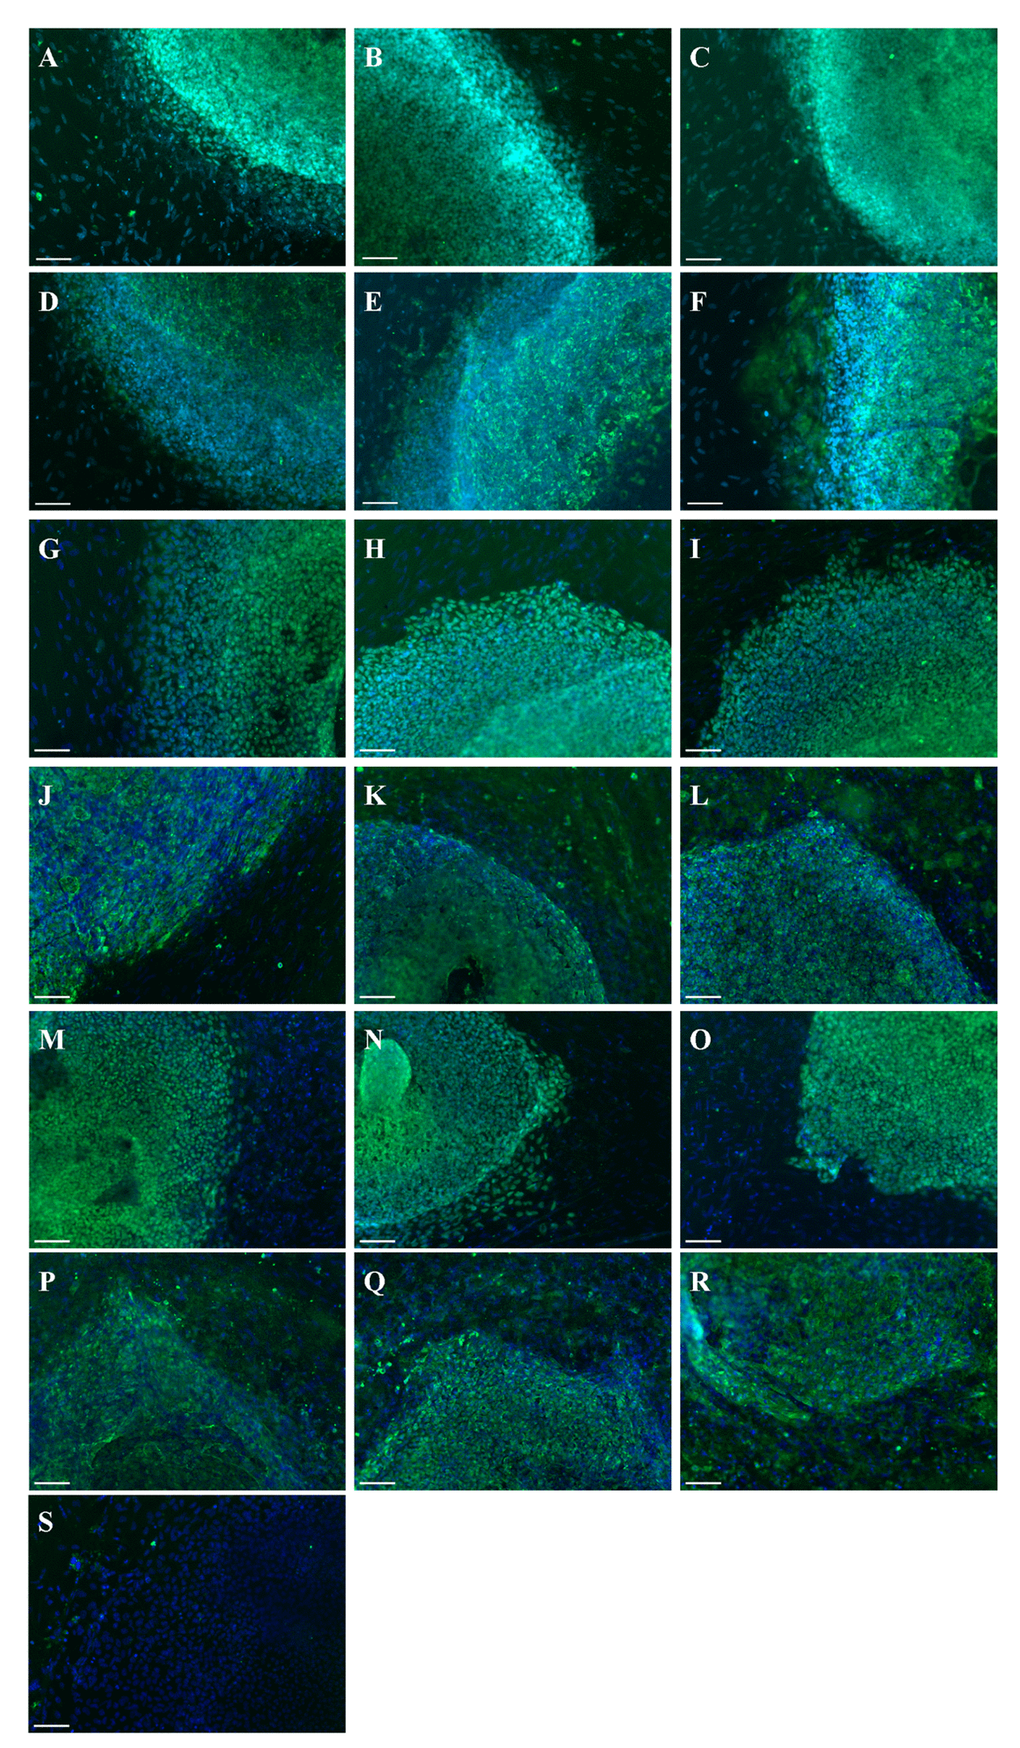 Generation of iPSC lines from FRDA-patients. Immunostaining of FA6 CL1 (A, D), CL2 (B, E), CL3 (C, F) for OCT4 (A-C) and TRA-1-60 (D-F); FA8 CL1 (G, J), CL2 (H, K), CL3 (I, L) for OCT4 (G-I) and TRA-1-60 (J-L); FA9 CL1 (M, P), CL2 (N, Q), CL3 (O, R) for OCT4 (M-O) and TRA-1-60 (P-R). (S) Negative isotype. Cells were counterstained with DAPI (blue). Scale bars: 50 μm.